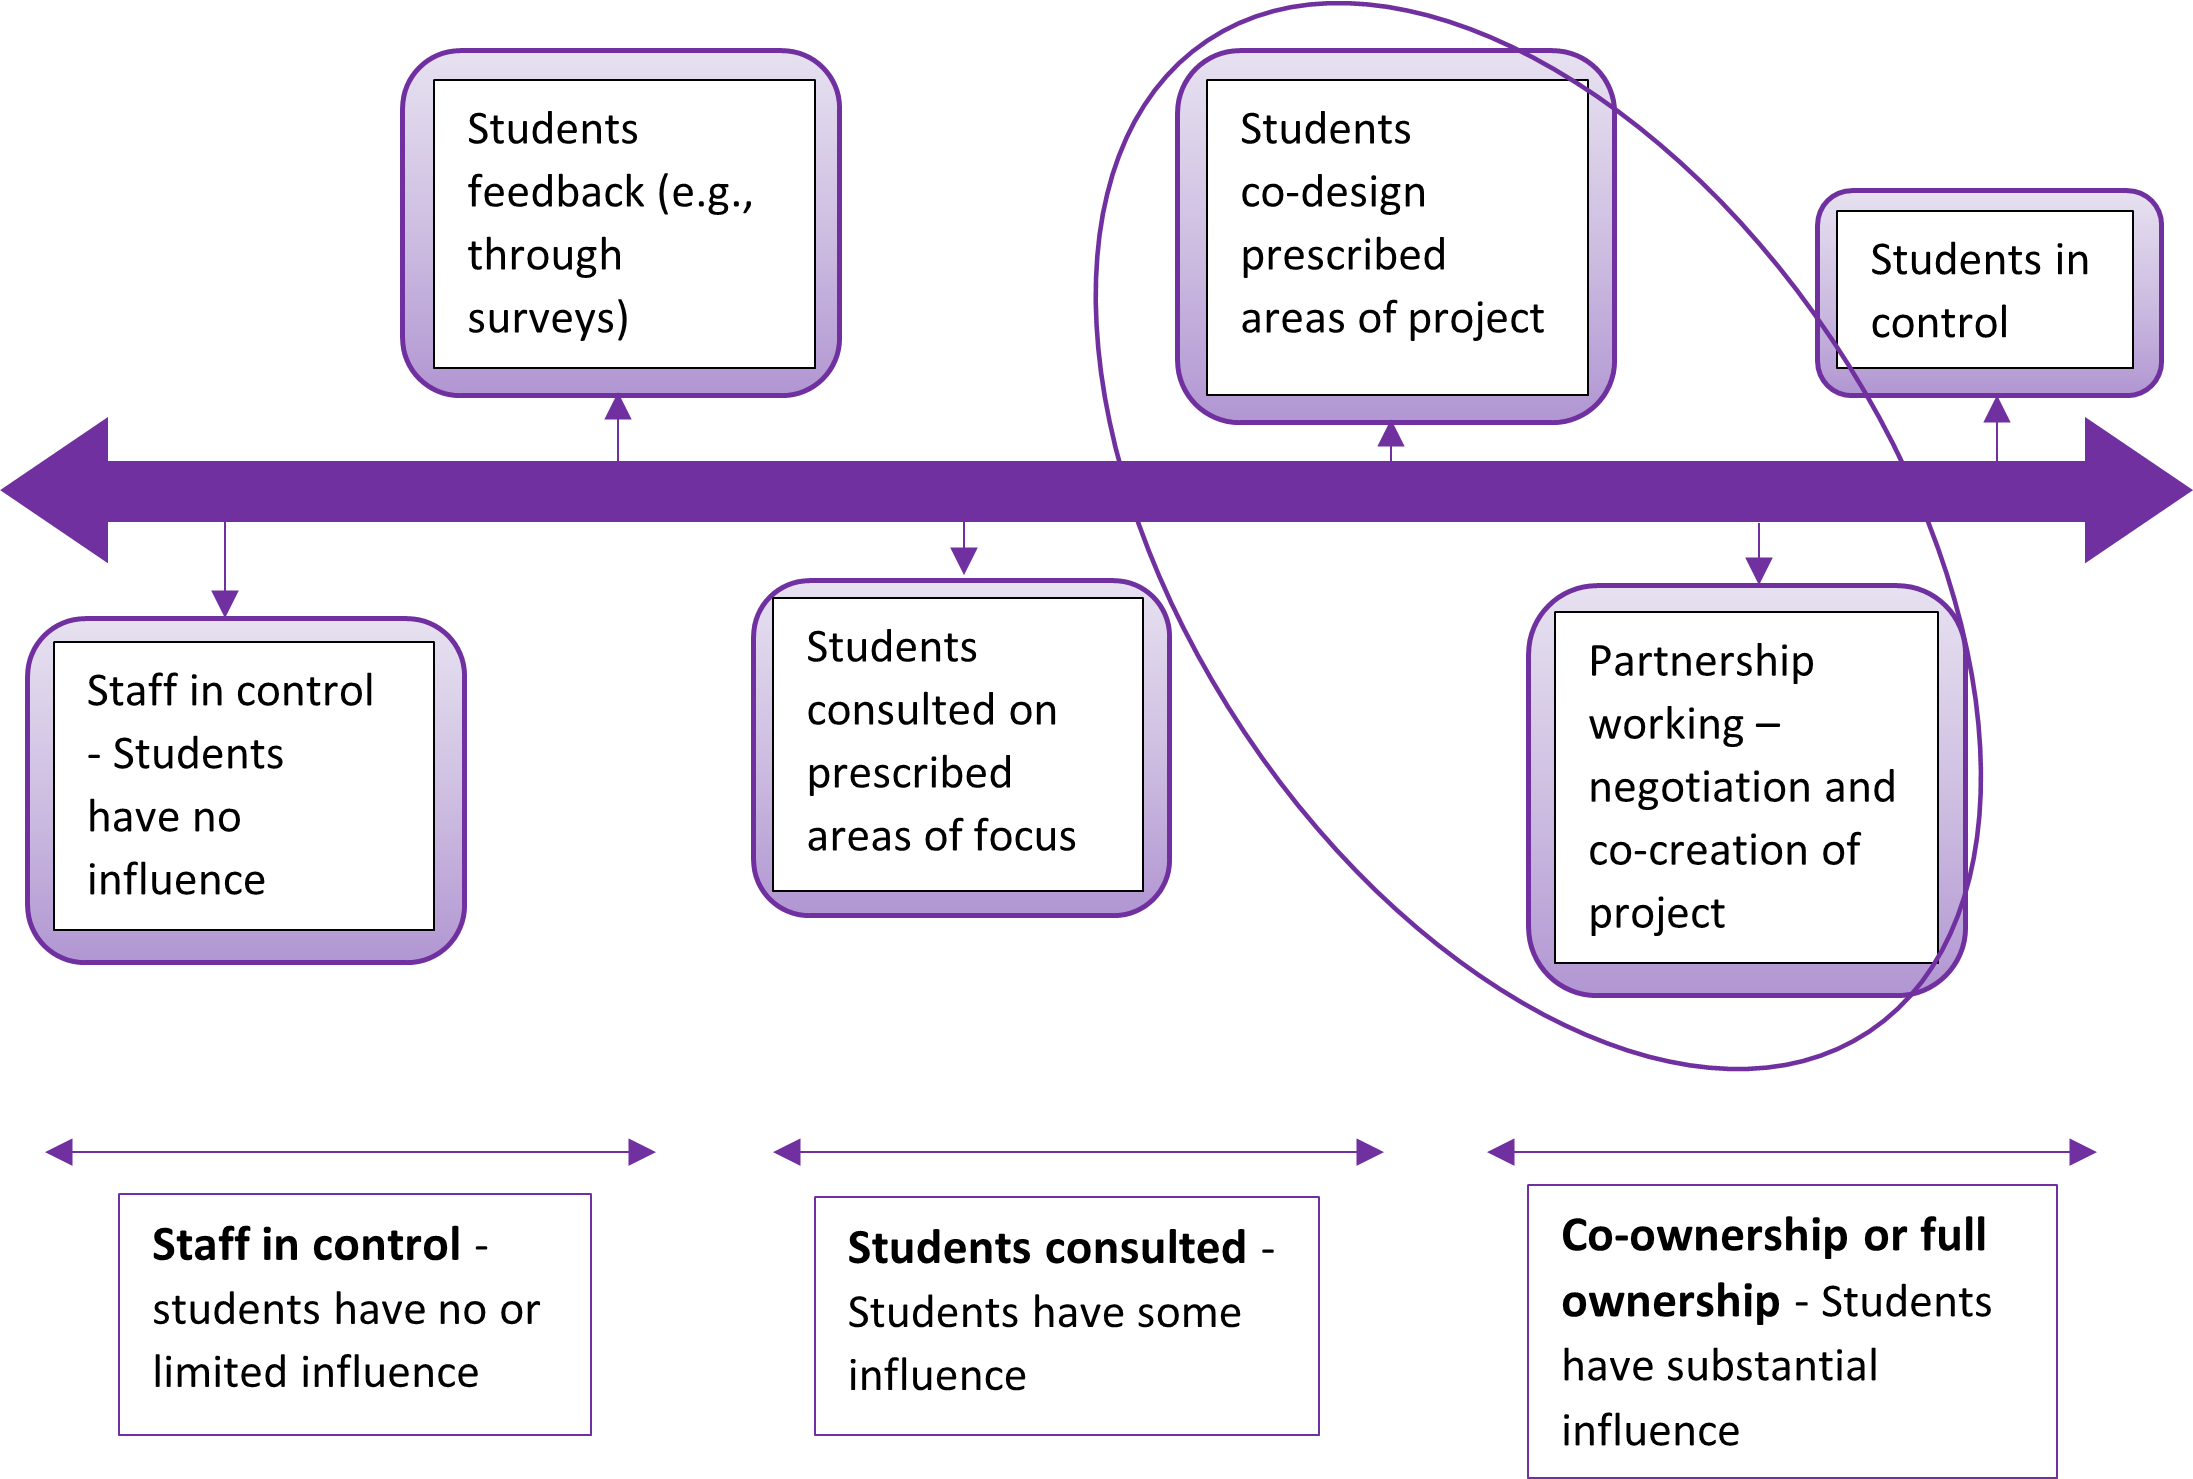 A scale moving from point 1, staff in control, and point 2, students feed back, the region where students have no or limited influence, through point 3, students consulted on prescribed areas of focus, and point 4, students co-design prescribed areas of project, the region where students are consulted and thus have some influence, to point 5, partnership working with negotiation and co-creation of project, and point 6, students in control, the region where students have substantial influence through co-ownership or full ownership